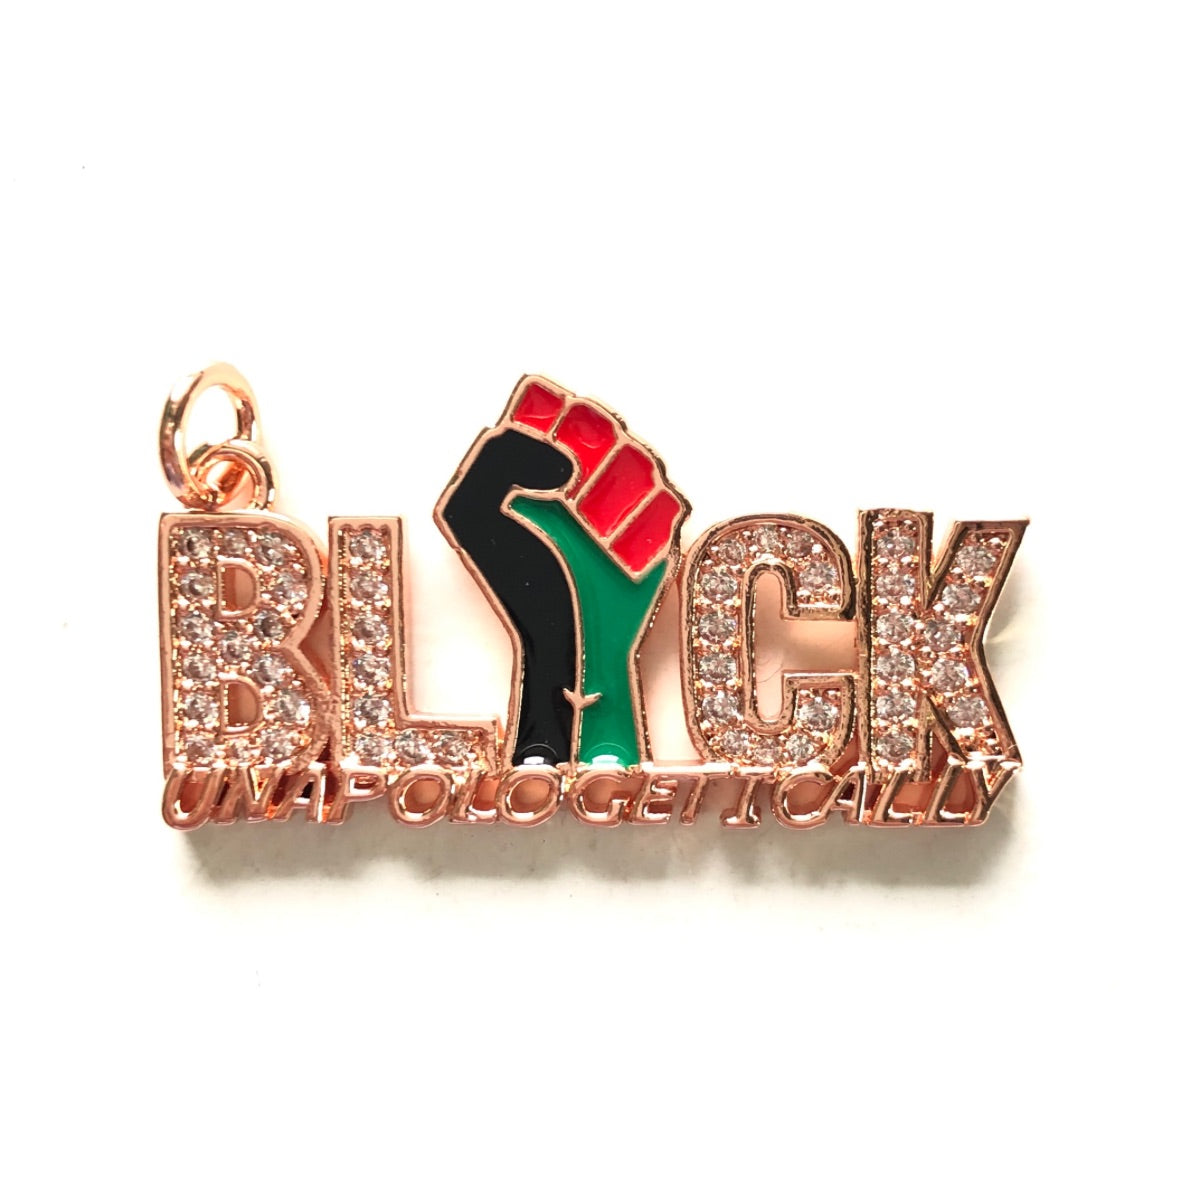 10pcs/lot 36*19mm Enamel Black Lives Matter Fist CZ Pave Black Unapologetically Word Charms for Juneteenth Black Month Awareness Rose Gold CZ Paved Charms Juneteenth & Black History Month Awareness New Charms Arrivals Charms Beads Beyond